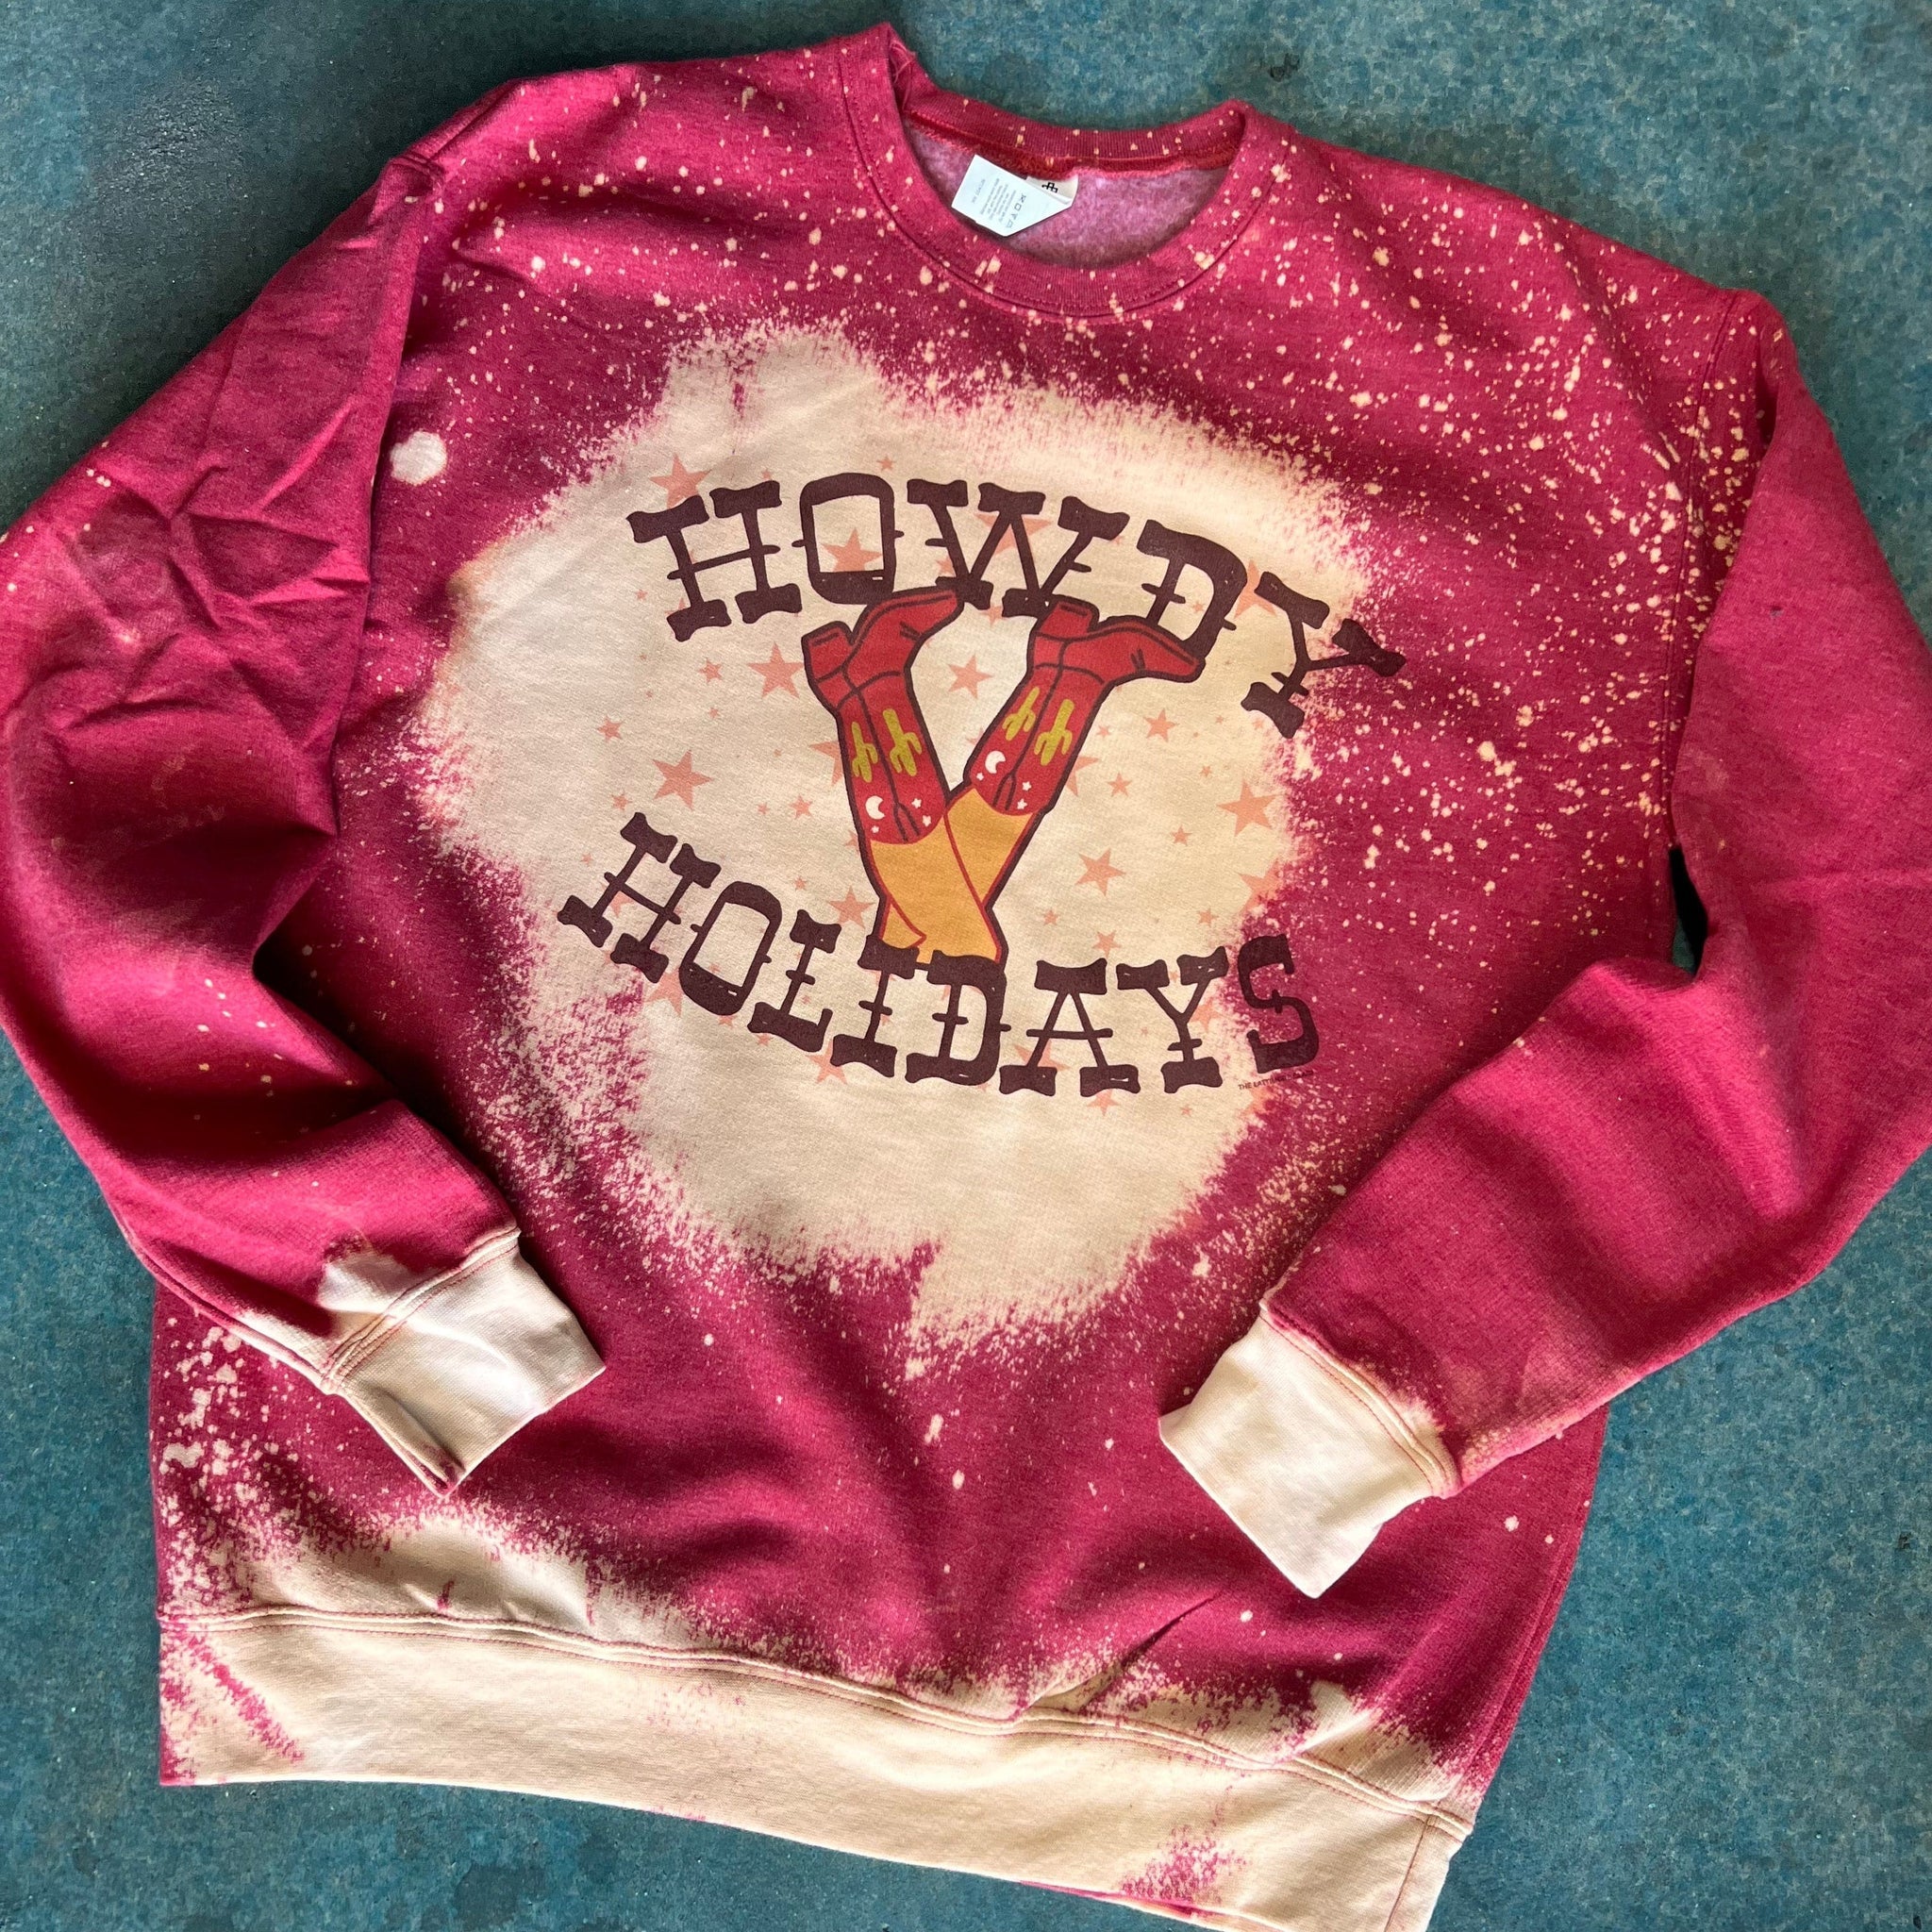 This red sweatshirt is bleached and includes a crew neckline, long sleeves, and a hand drawn Christmas design of legs with red cowboy boots on. The cowboy boots have cactus and moon details on them, and the words "HOWDY HOLIDAYS" are above and below the design. The Western font is a fun touch to this sweatshirt. The bleached look can be found all over the sweatshirt, bottoms of sleeves, bottom of sweatshirt, and behind the design. This is shown as a flatlay on a blue background. 